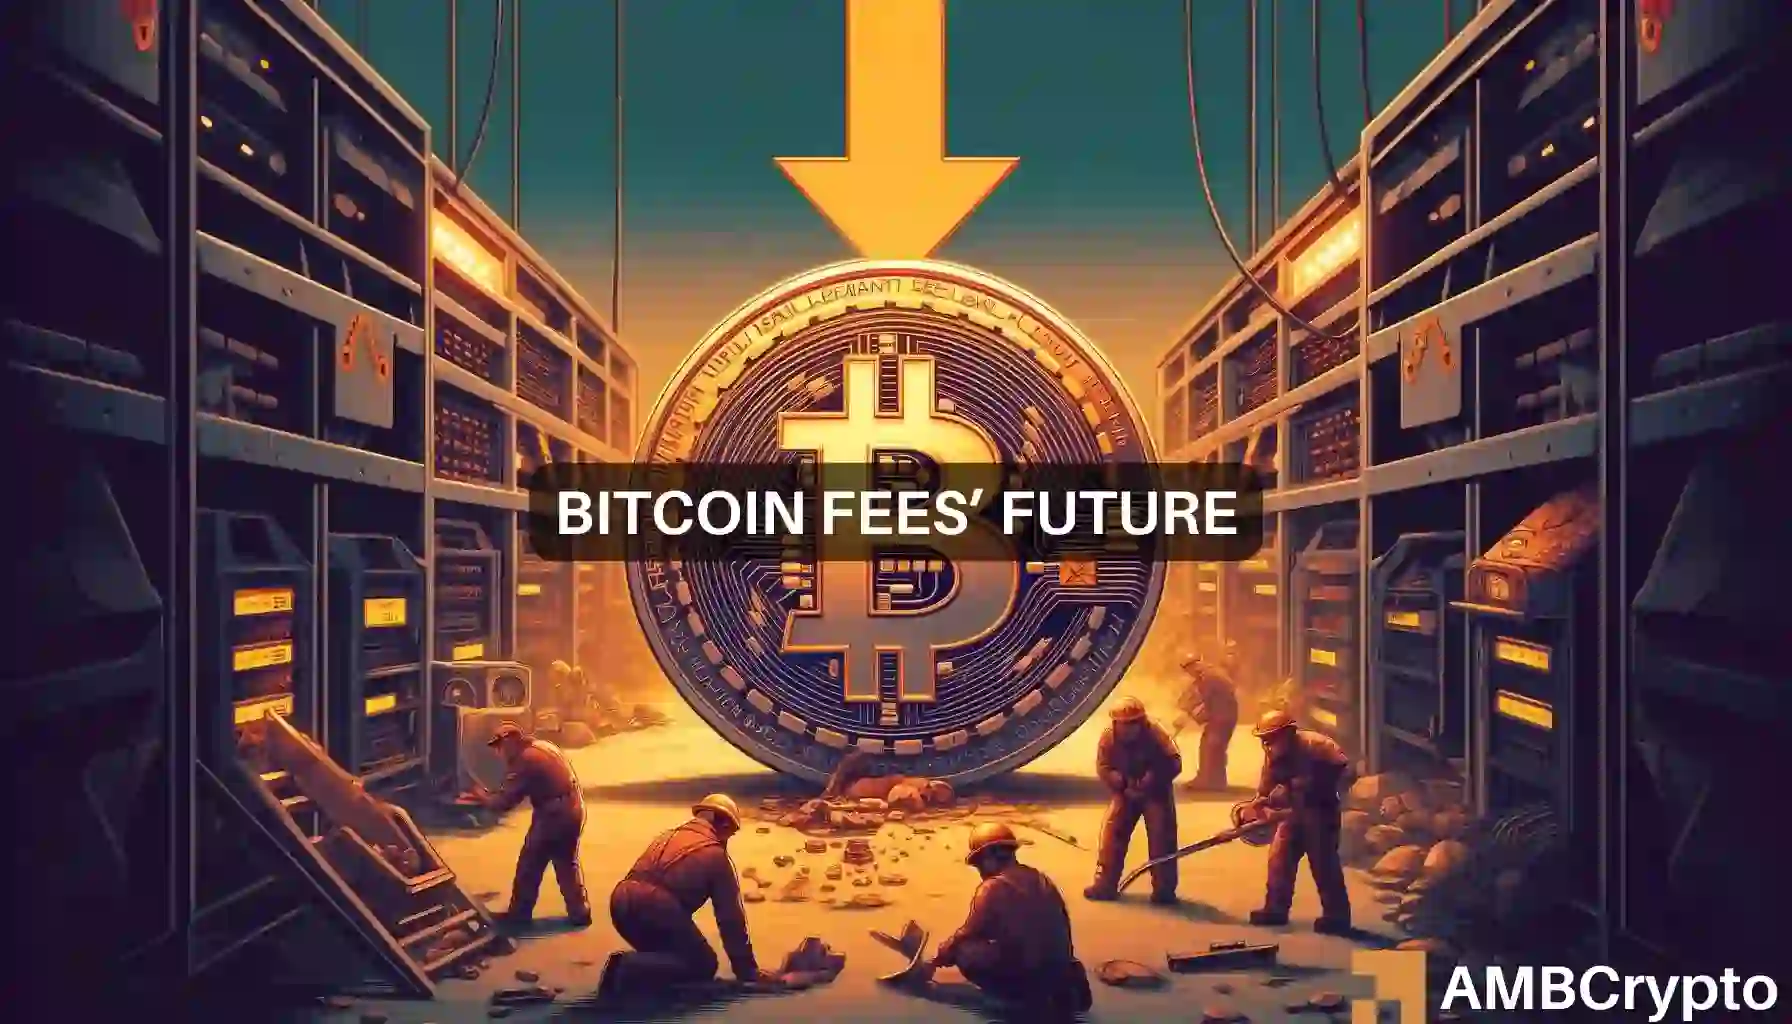 Bitcoin fees crash from $2.4M to $10 post-halving - Why?